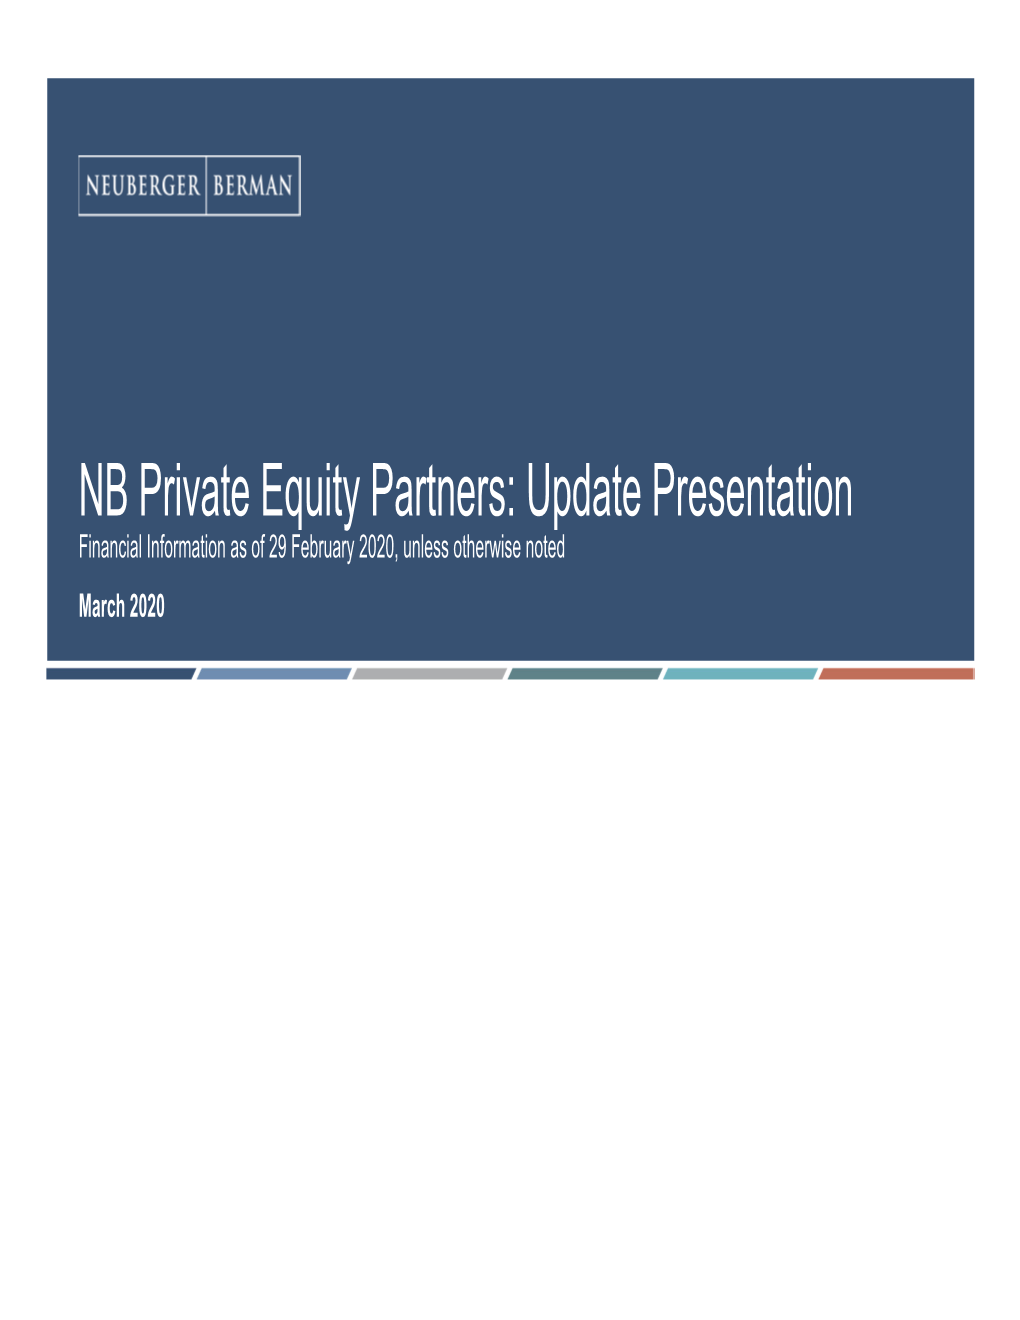 NB Private Equity Partners: Update Presentation